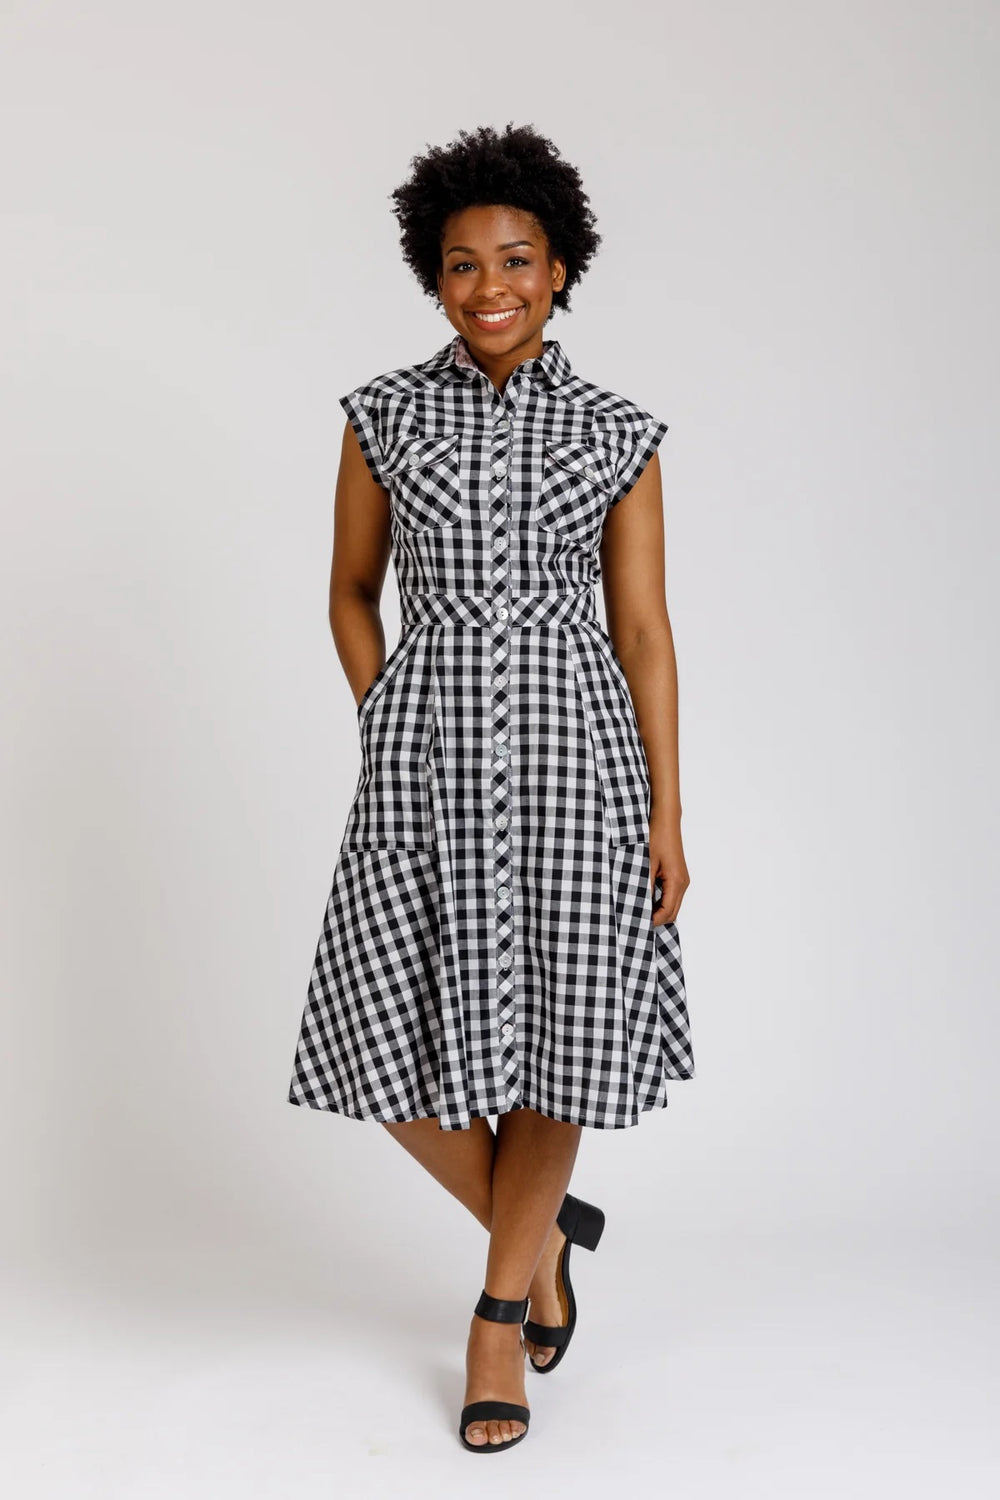 Woman wearing the Matilda Dress sewing pattern from Megan Nielsen on The Fold Line. A shirt dress pattern made in cotton, linen, chambray, rayon, tencel, or silk fabrics, featuring princess seams, drop shoulder, sleeveless, front button closure, back yoke